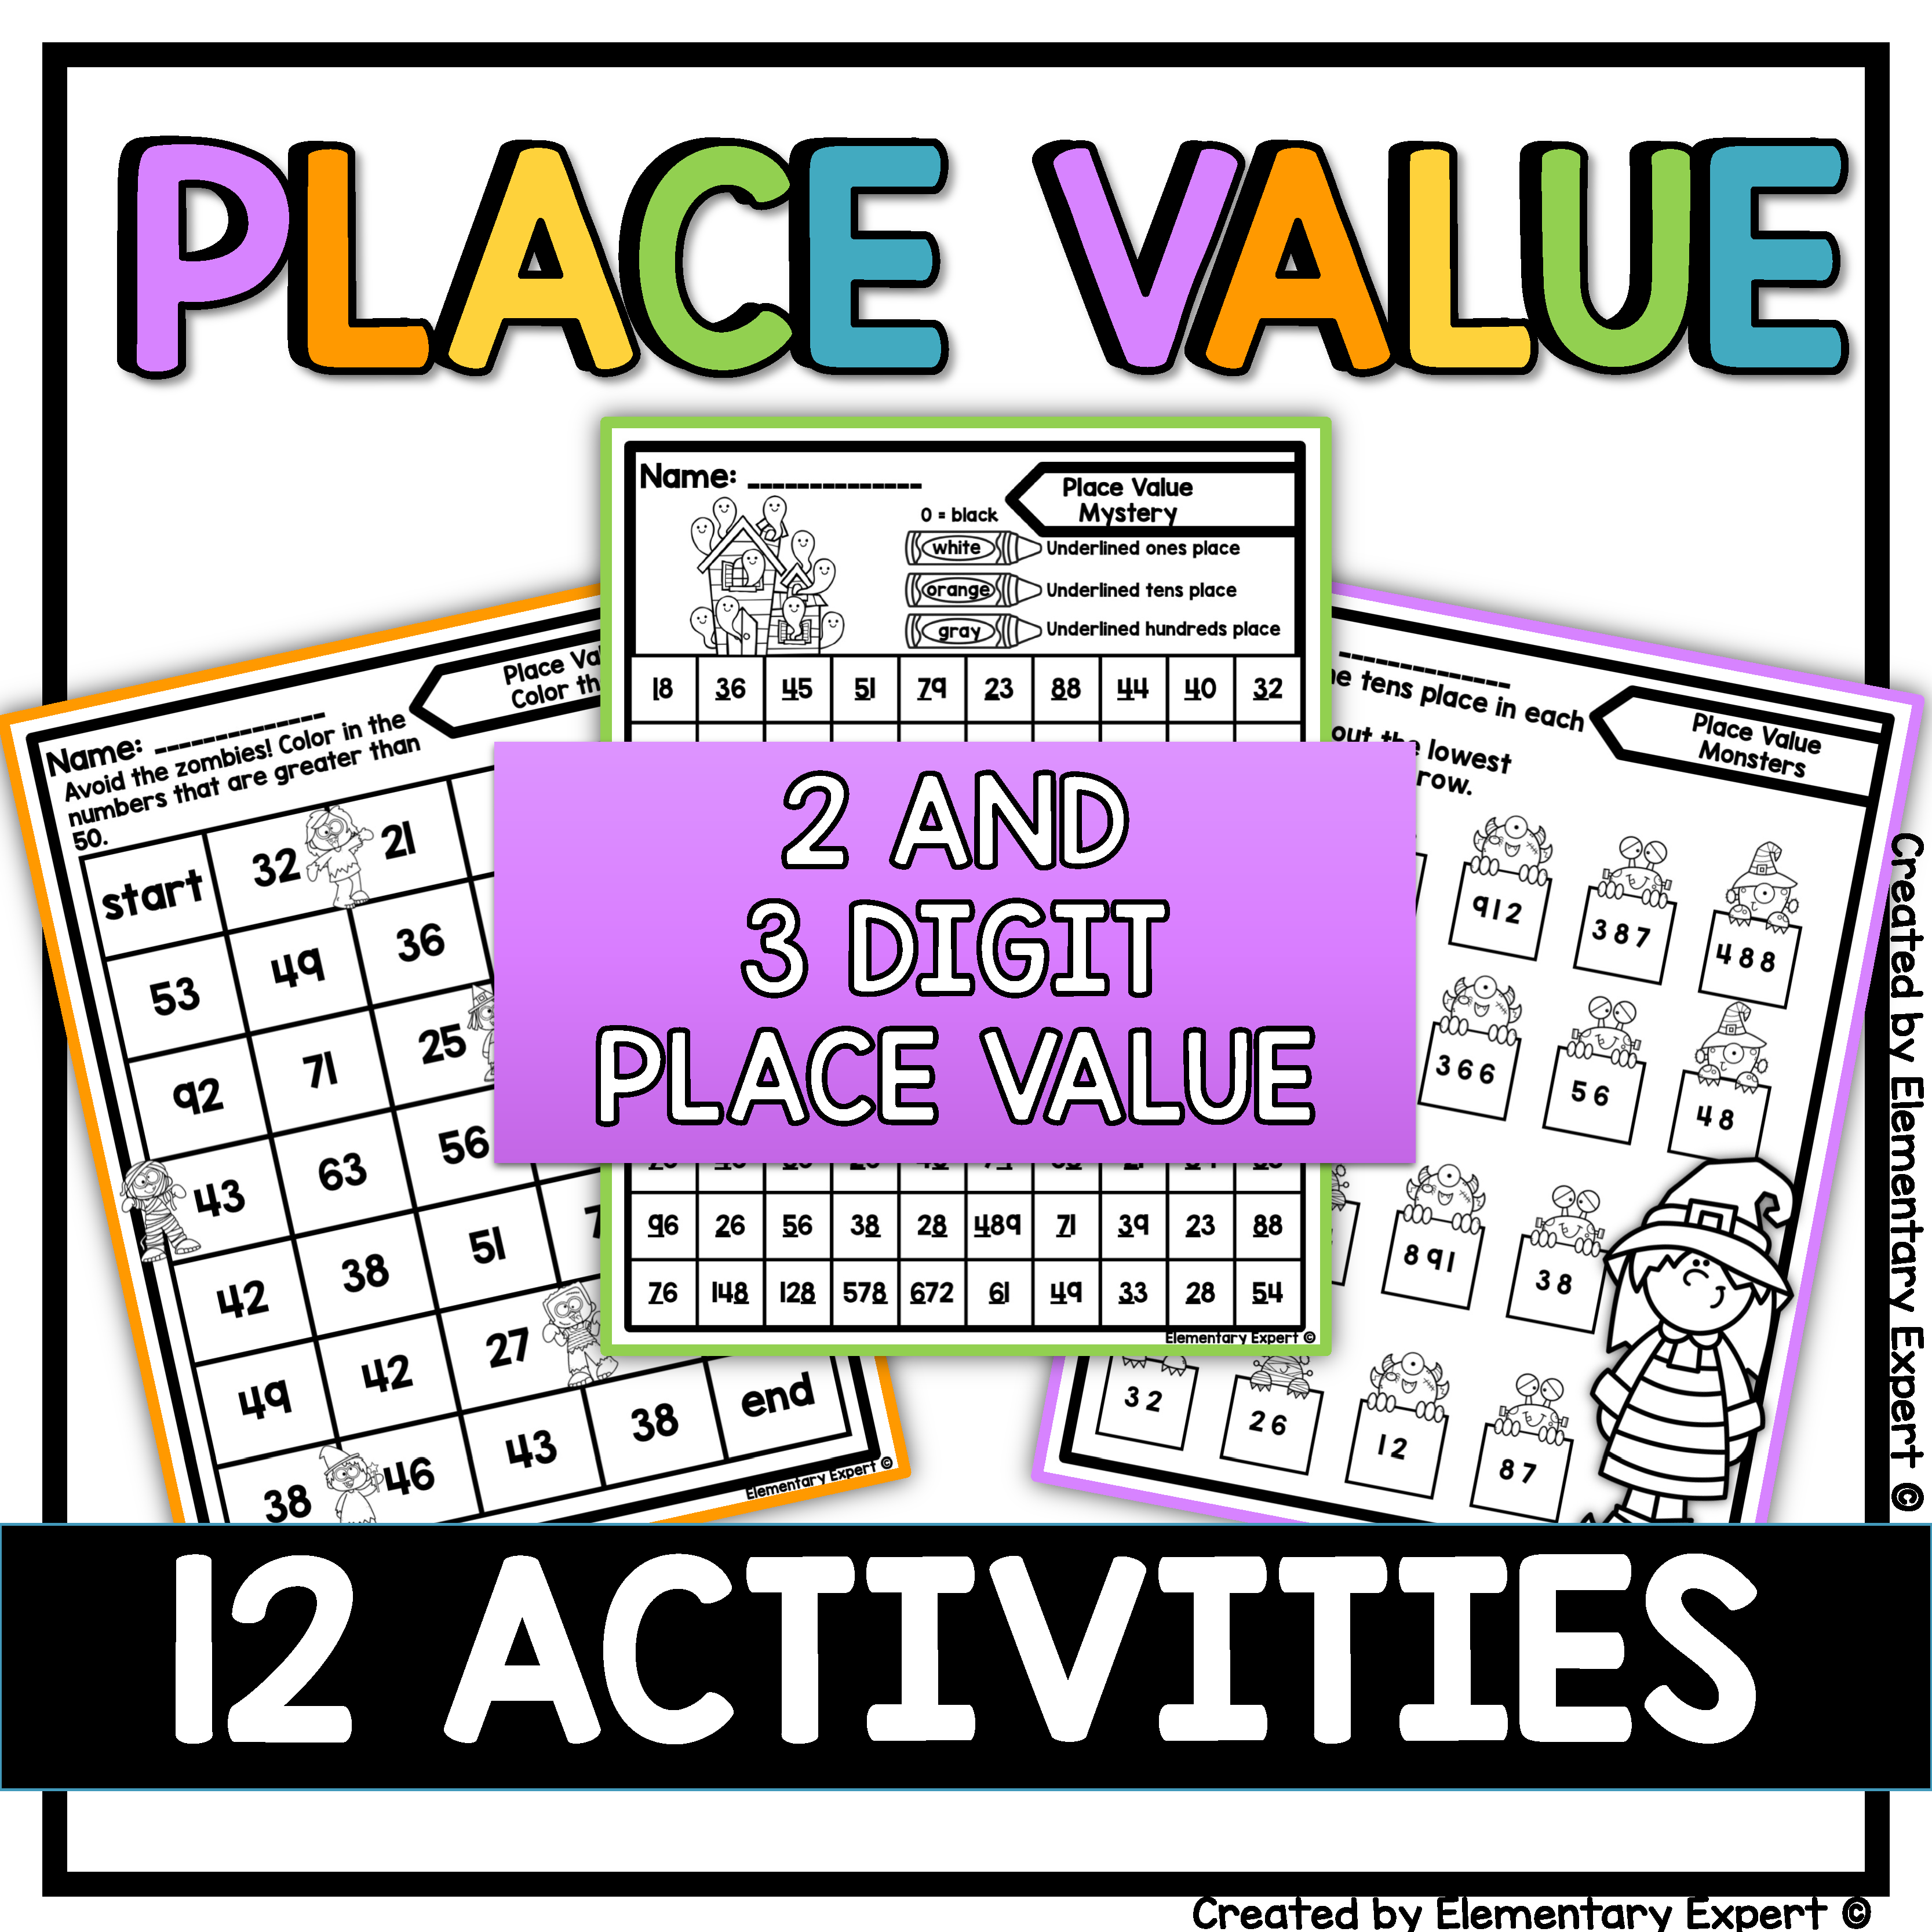 Place Value Activities Mazes, Color By Code, and Puzzles